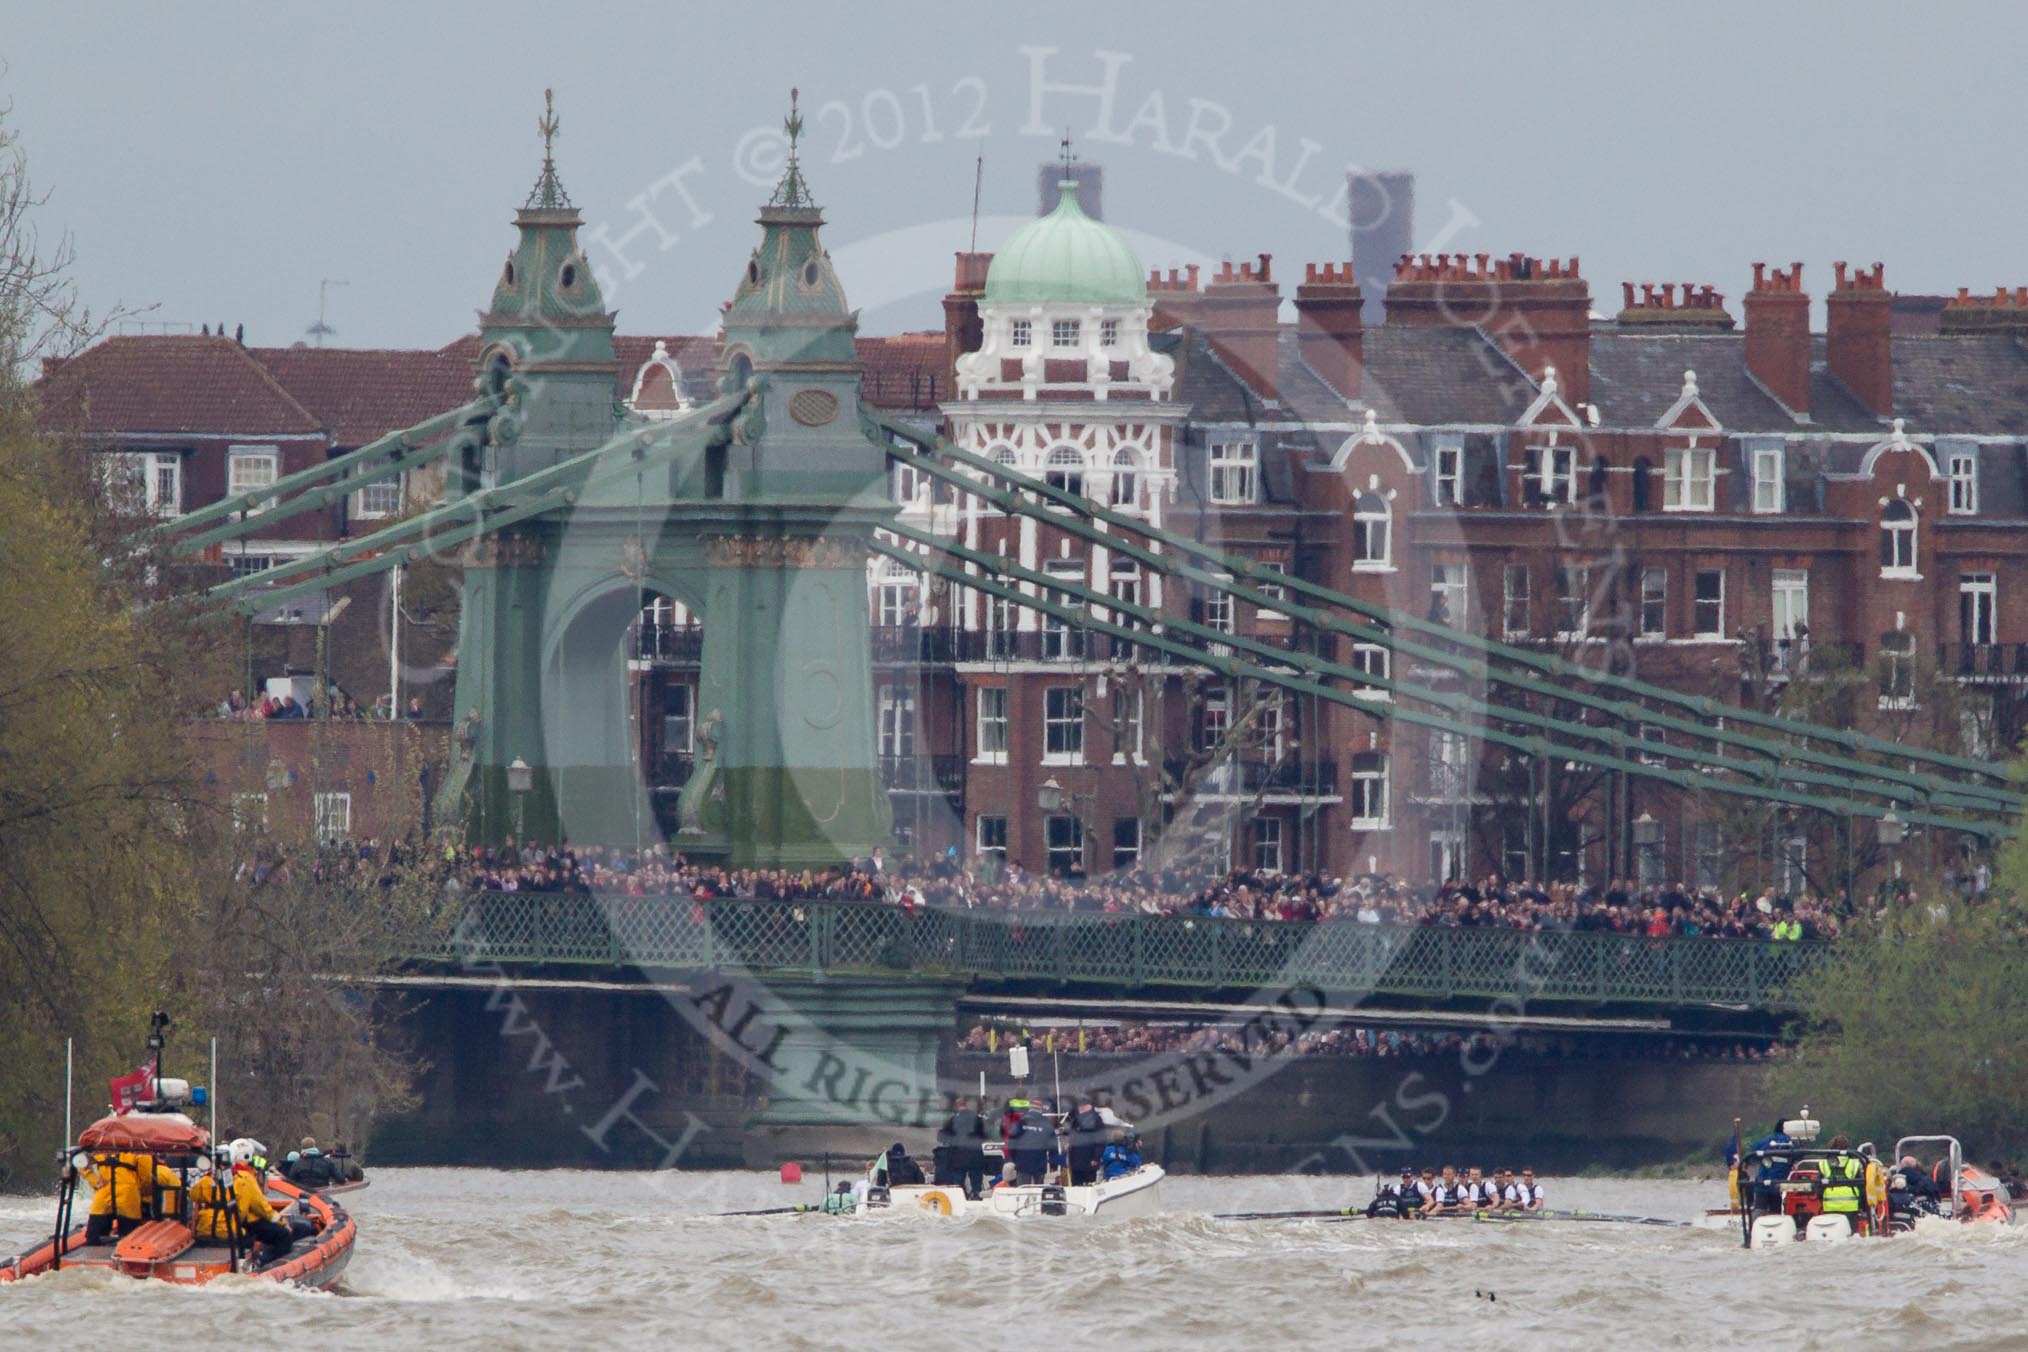 The Boat Race 2012: The 2012 Boat Race, with the boats approaching Hammersmith Bridge: The Cambridge Blue Boat on the left, nearly covered by the boat of the umpire, and the Oxford Blue Boat on the right..




on 07 April 2012 at 14:20, image #300